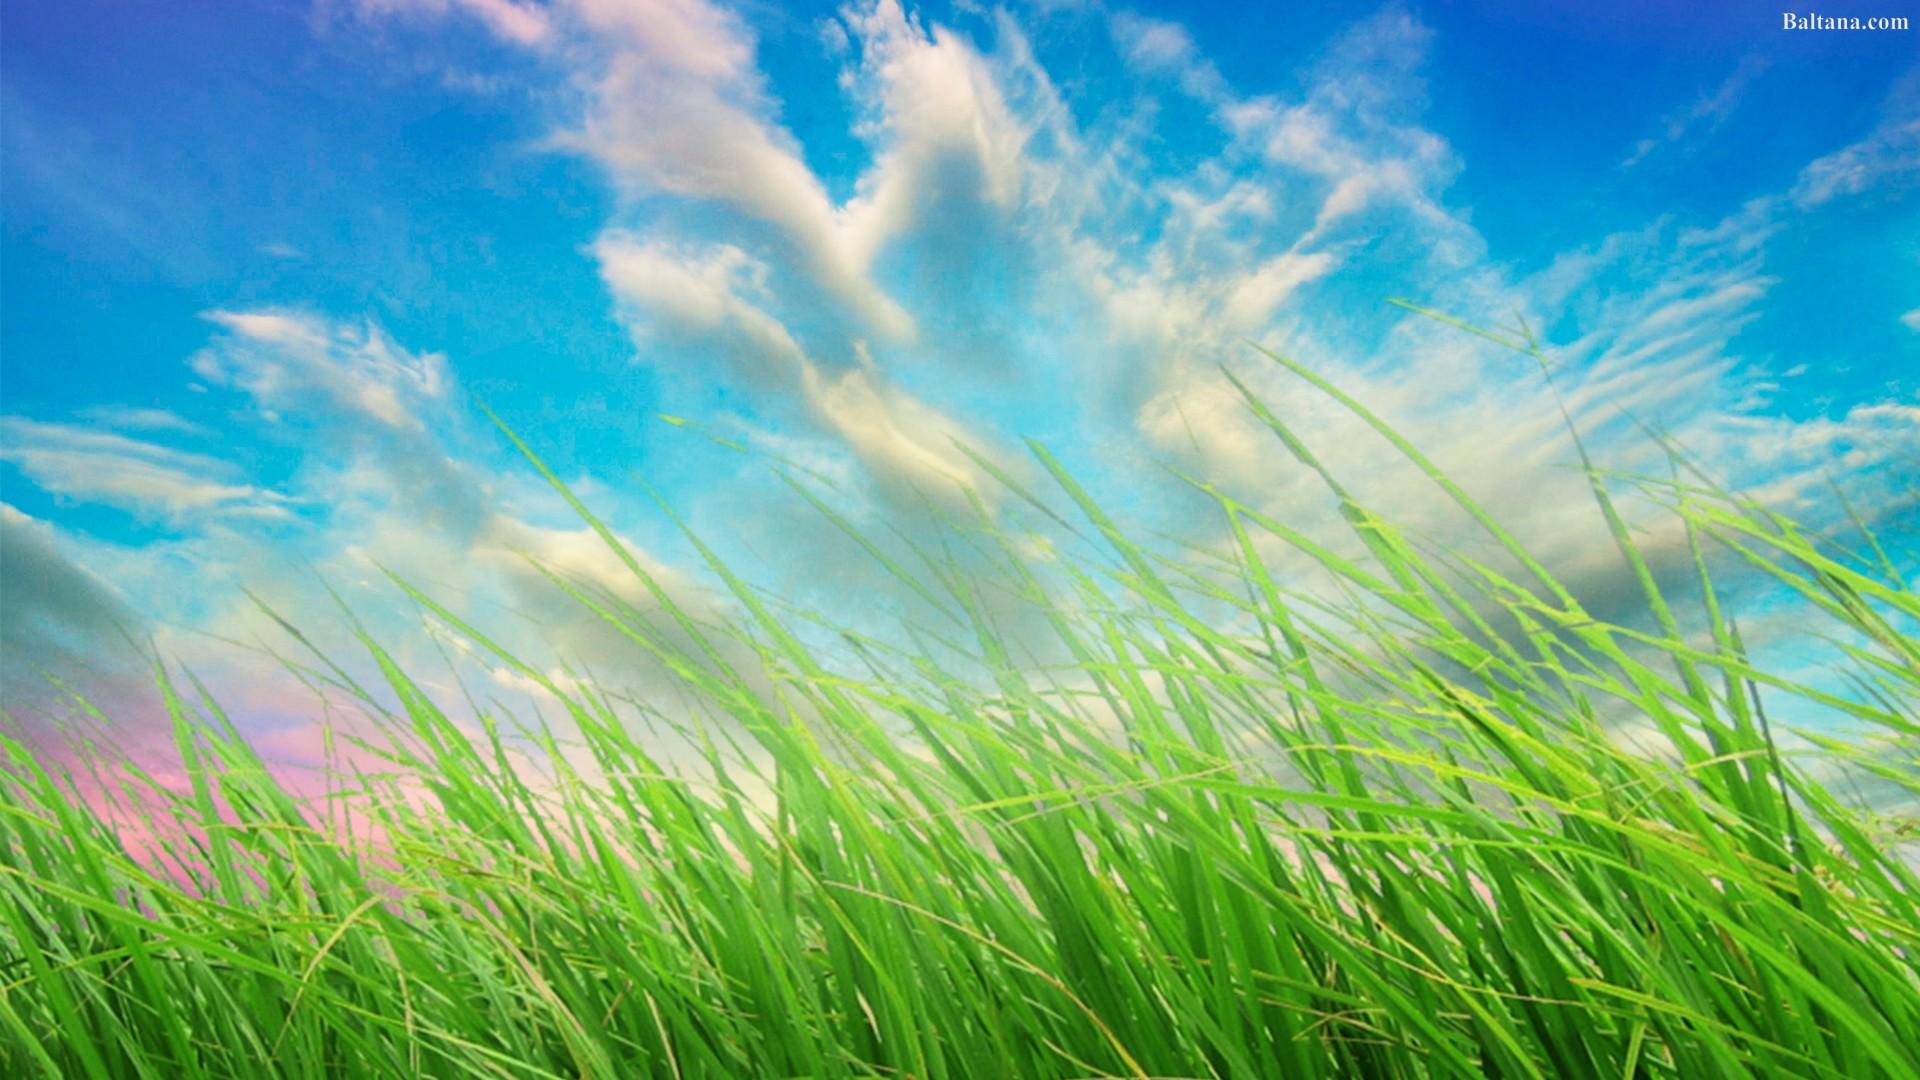 Grass Wallpaper HD Background, Image, Pics, Photo Free Download